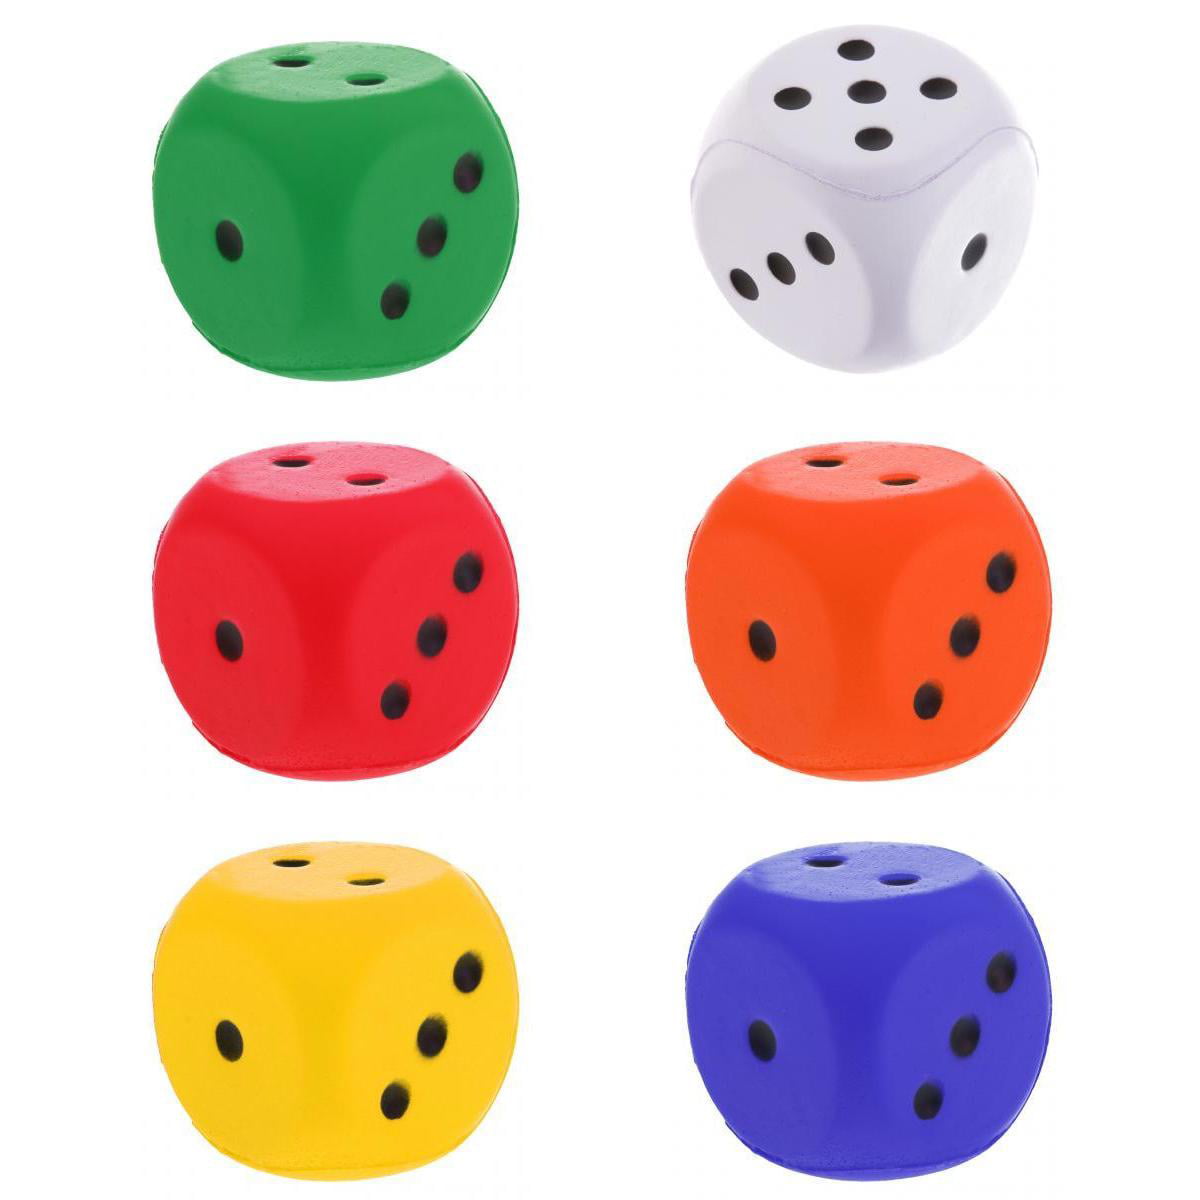 Sponge Dice Six Sided Game Toy Playing Dice Children Teaching Education Toy 